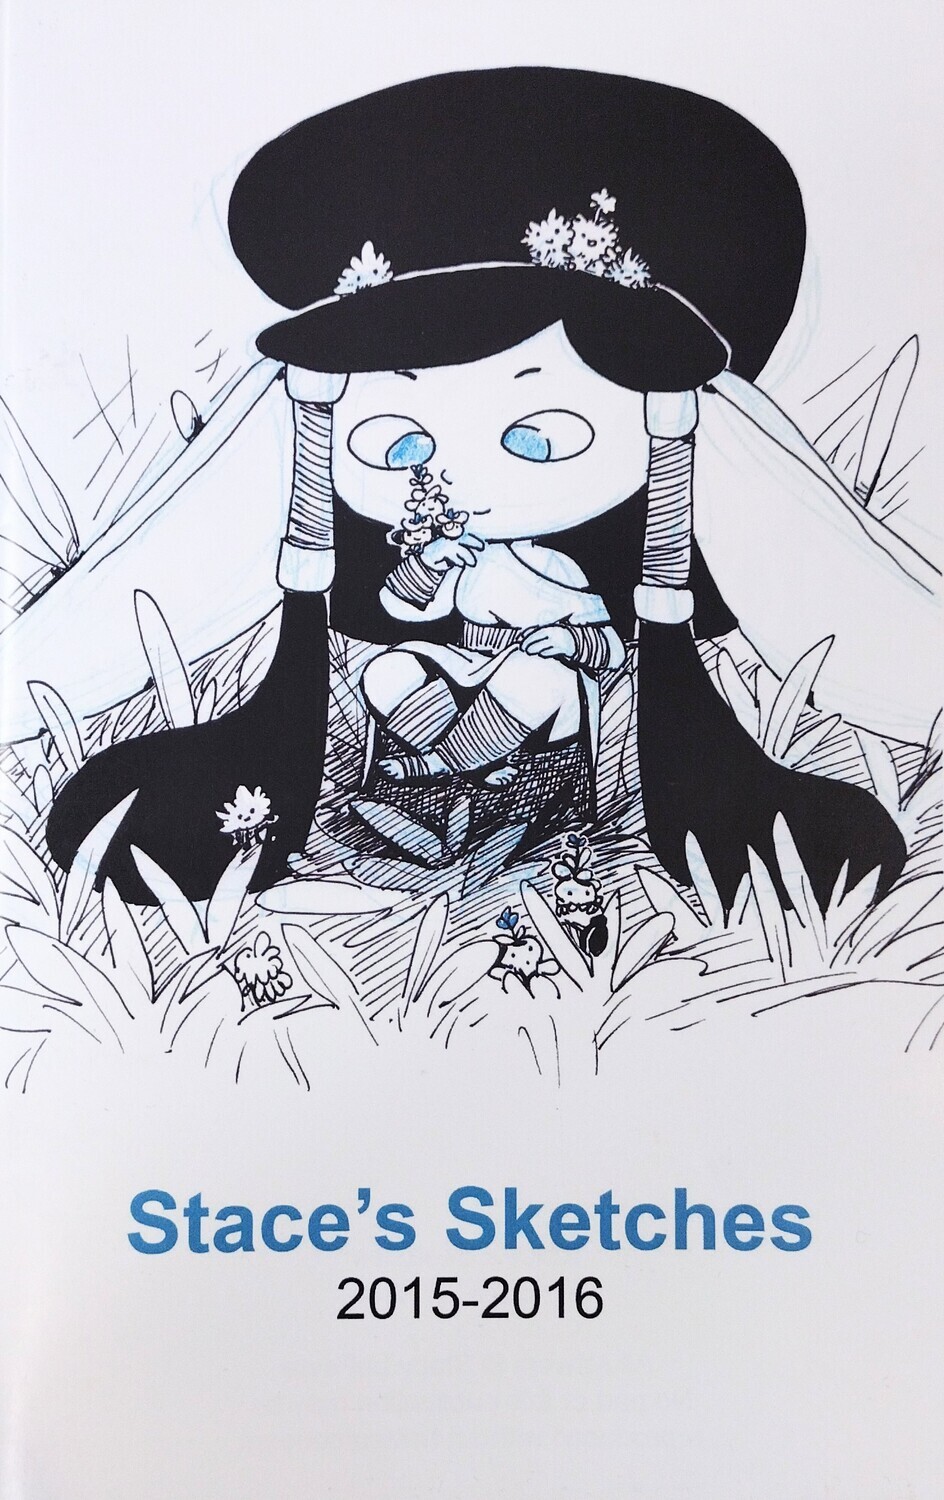 Stace’s Sketches: 2015-2016 - Book by Stacy LeFevre